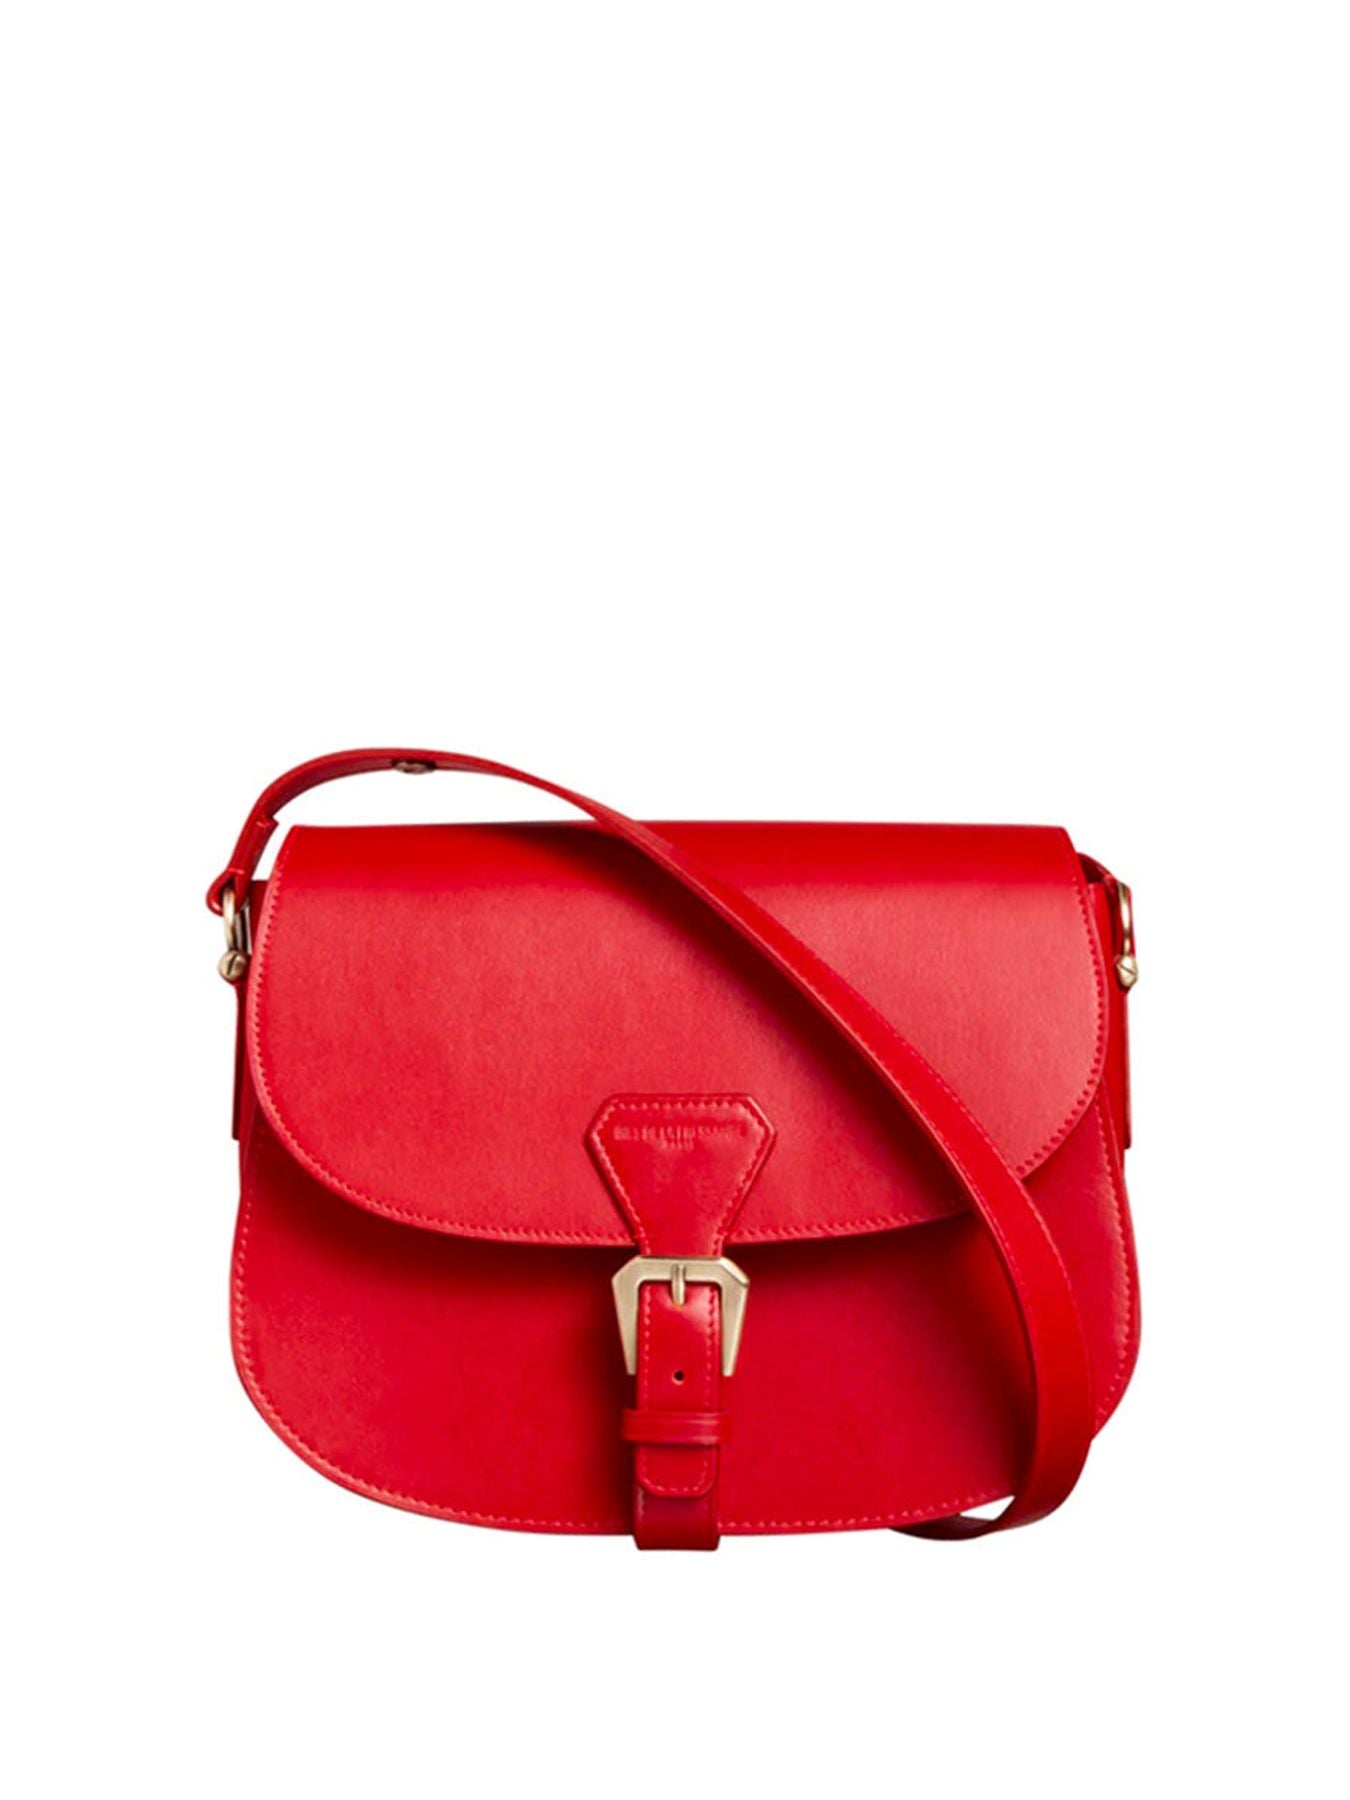 bag-flaneur-leather-red